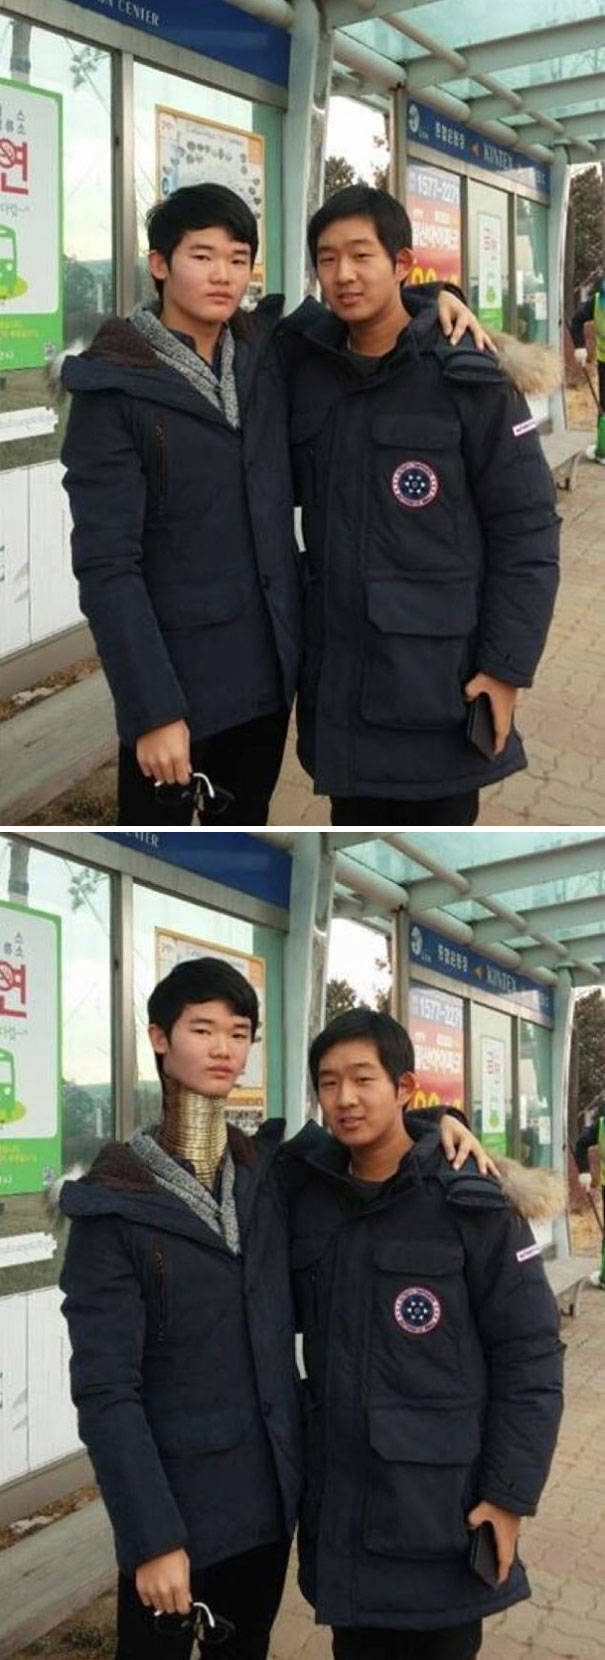 If You Want To Fix Your Photo, Don’t Give It To These Korean Photoshop Masters